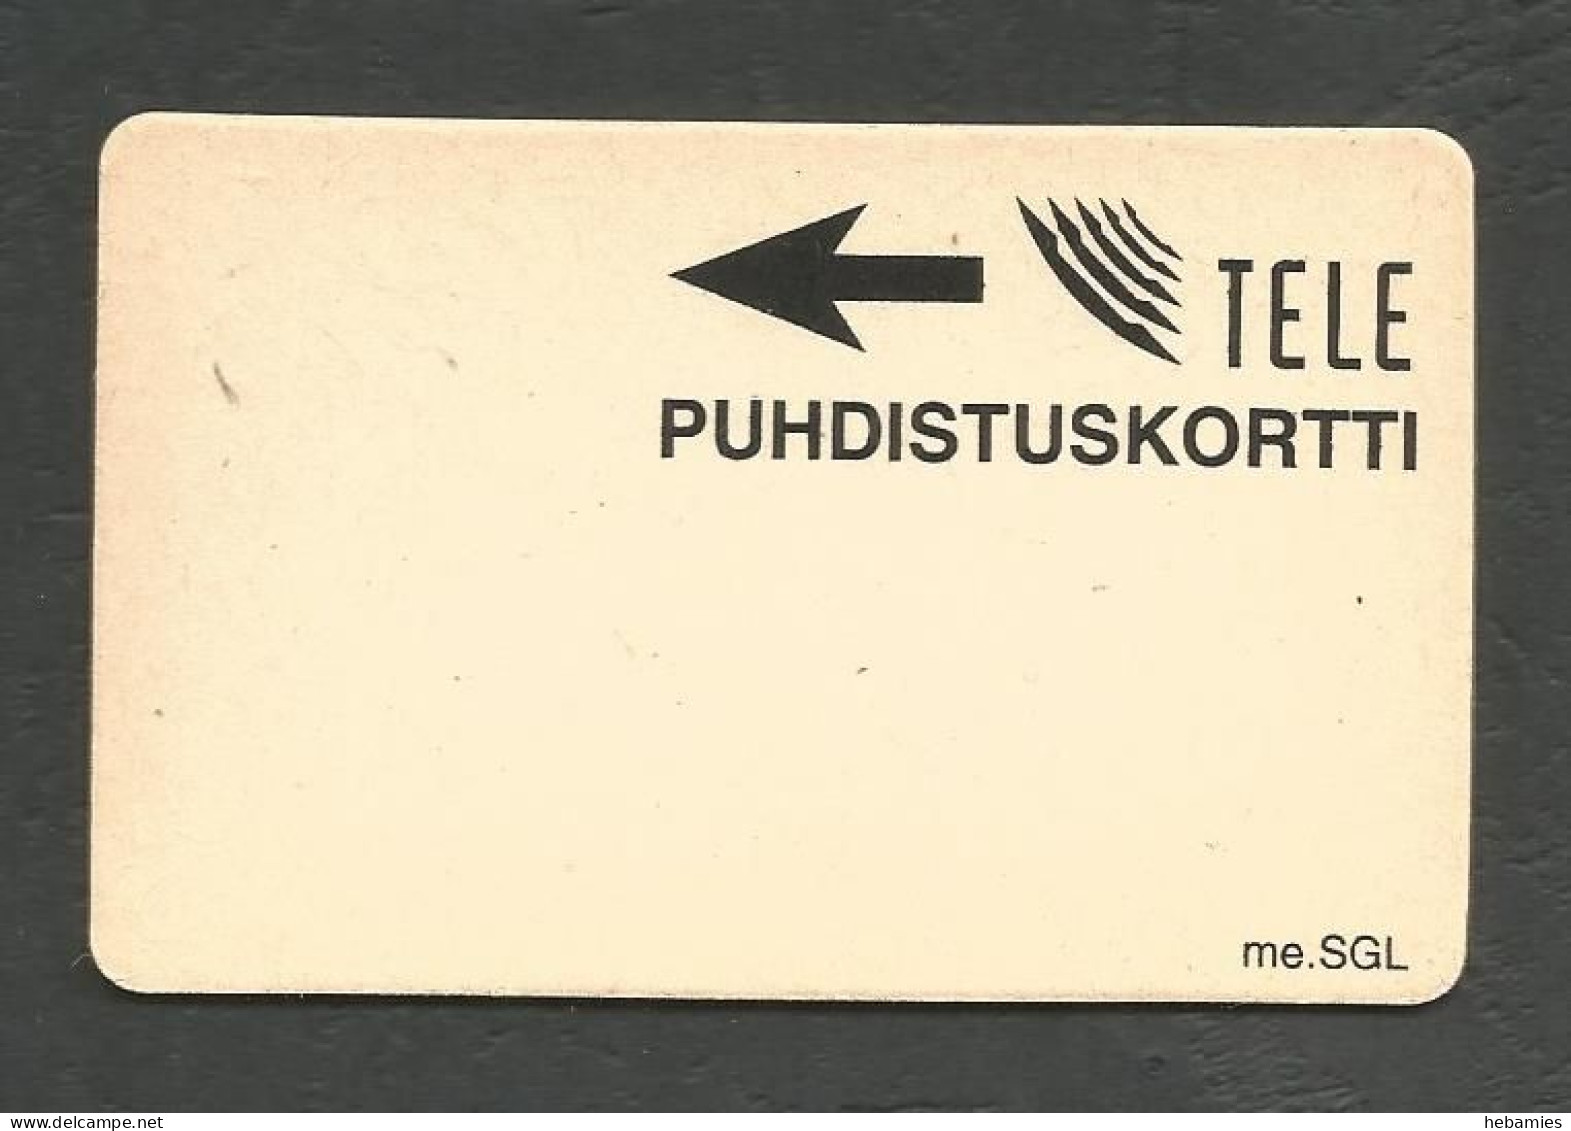 PAYPHONE CLEANING CARD  - TELE - FINLAND - - Finlande